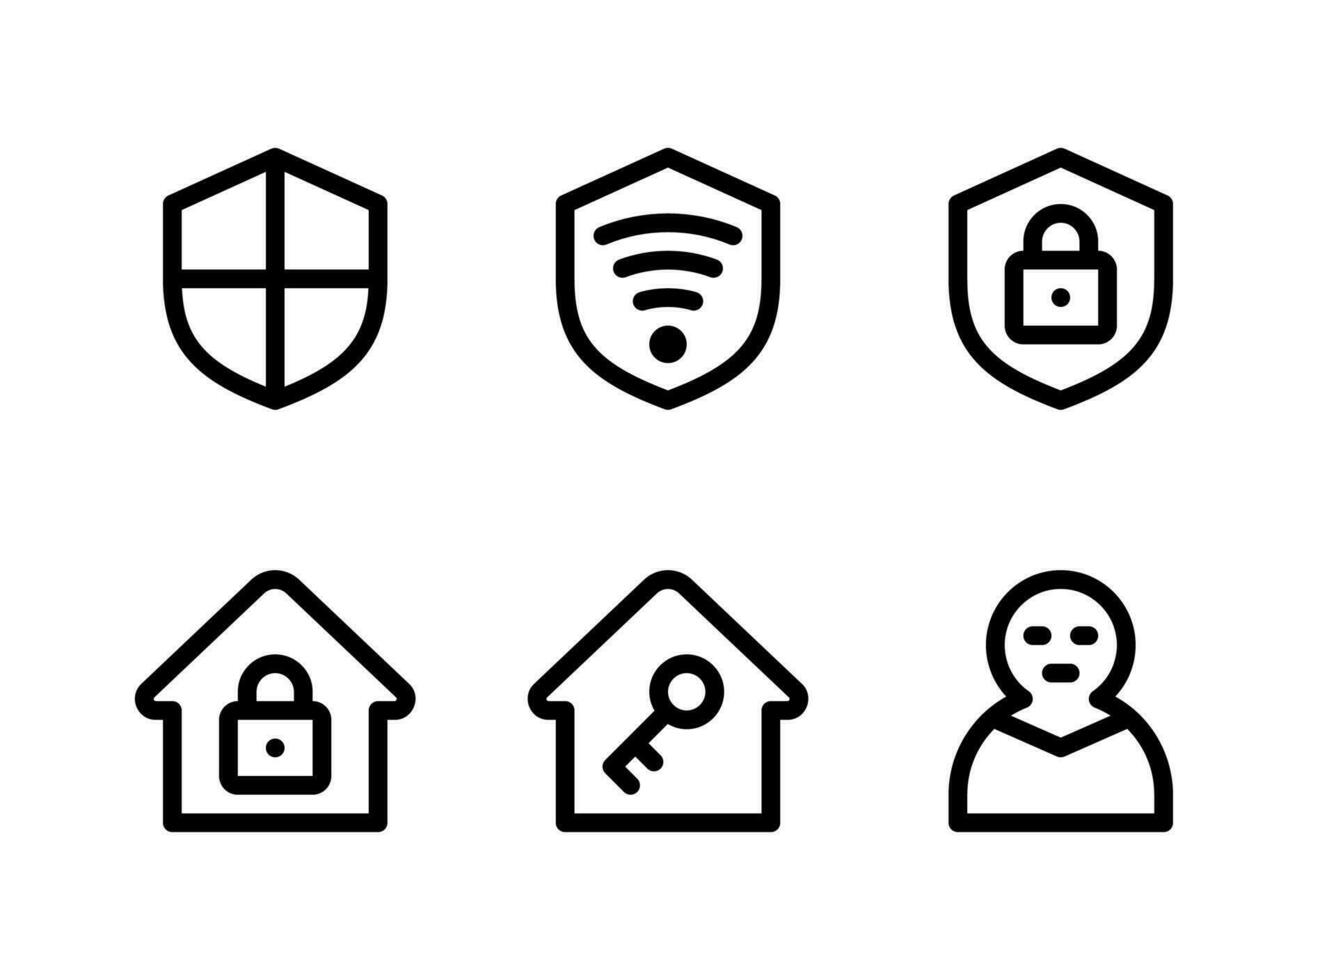 Simple Set of Security Related Vector Line Icons. Contains Icons as Shield, Wifi Secure, House, Thief and more.